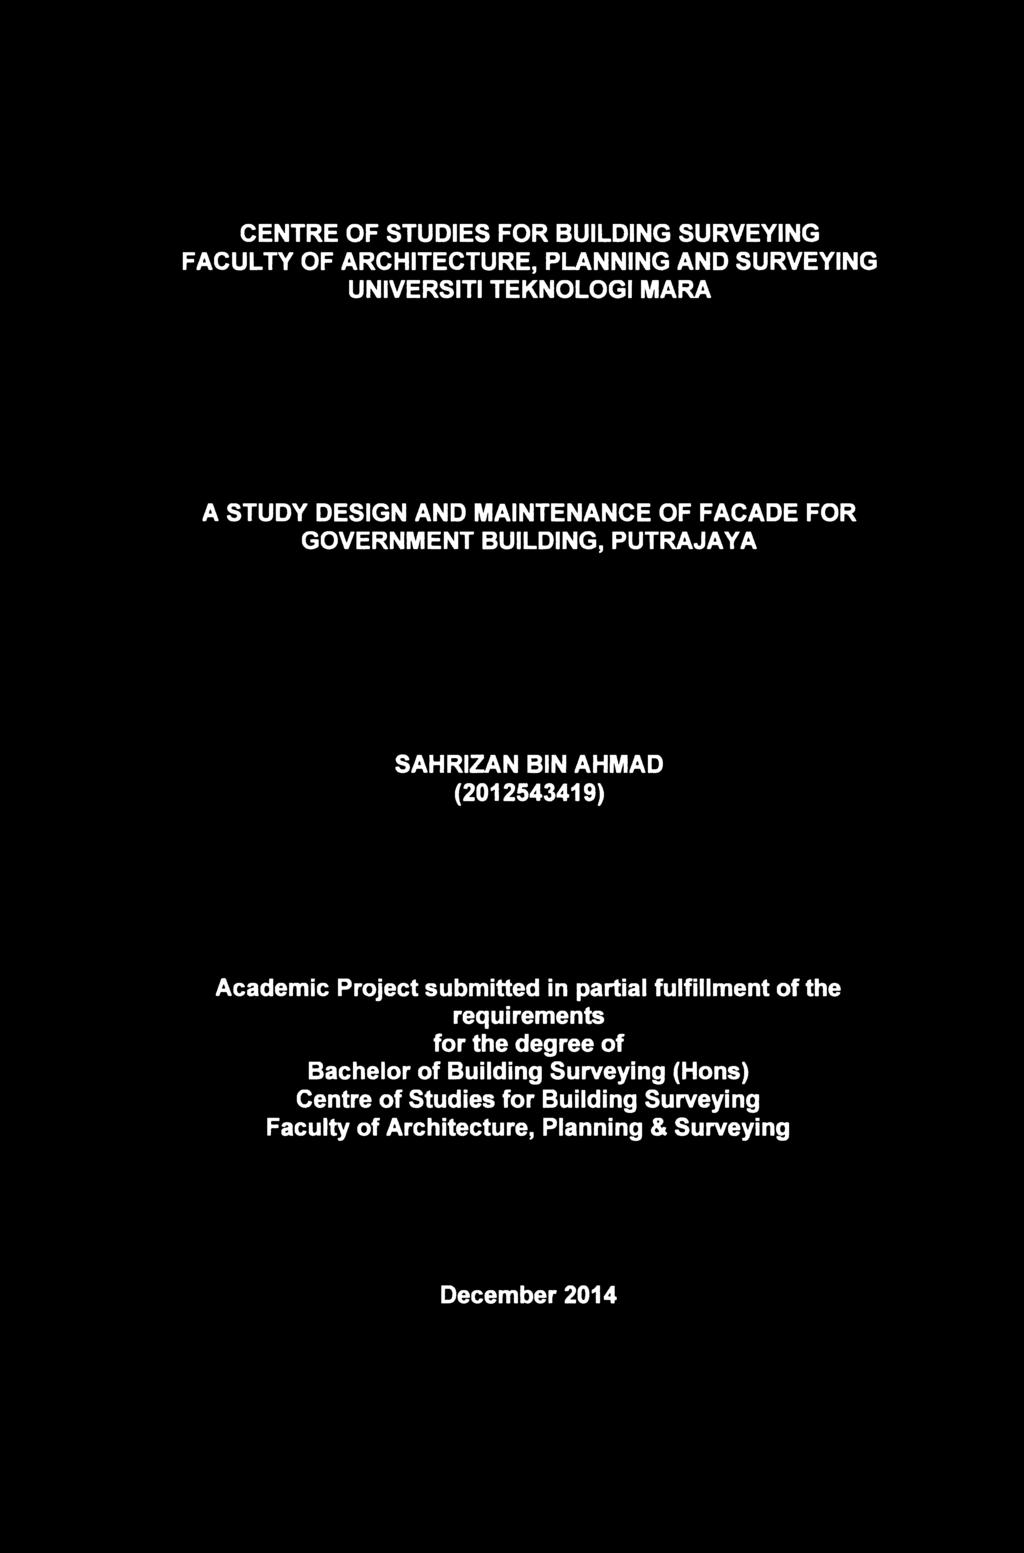 CENTRE OF STUDIES FOR BUILDING SURVEYING FACULTY OF ARCHITECTURE, PLANNING AND SURVEYING UNIVERSITI TEKNOLOGI MARA A STUDY DESIGN AND MAINTENANCE OF FACADE FOR GOVERNMENT BUILDING, PUTRAJAYA SAHRIZAN